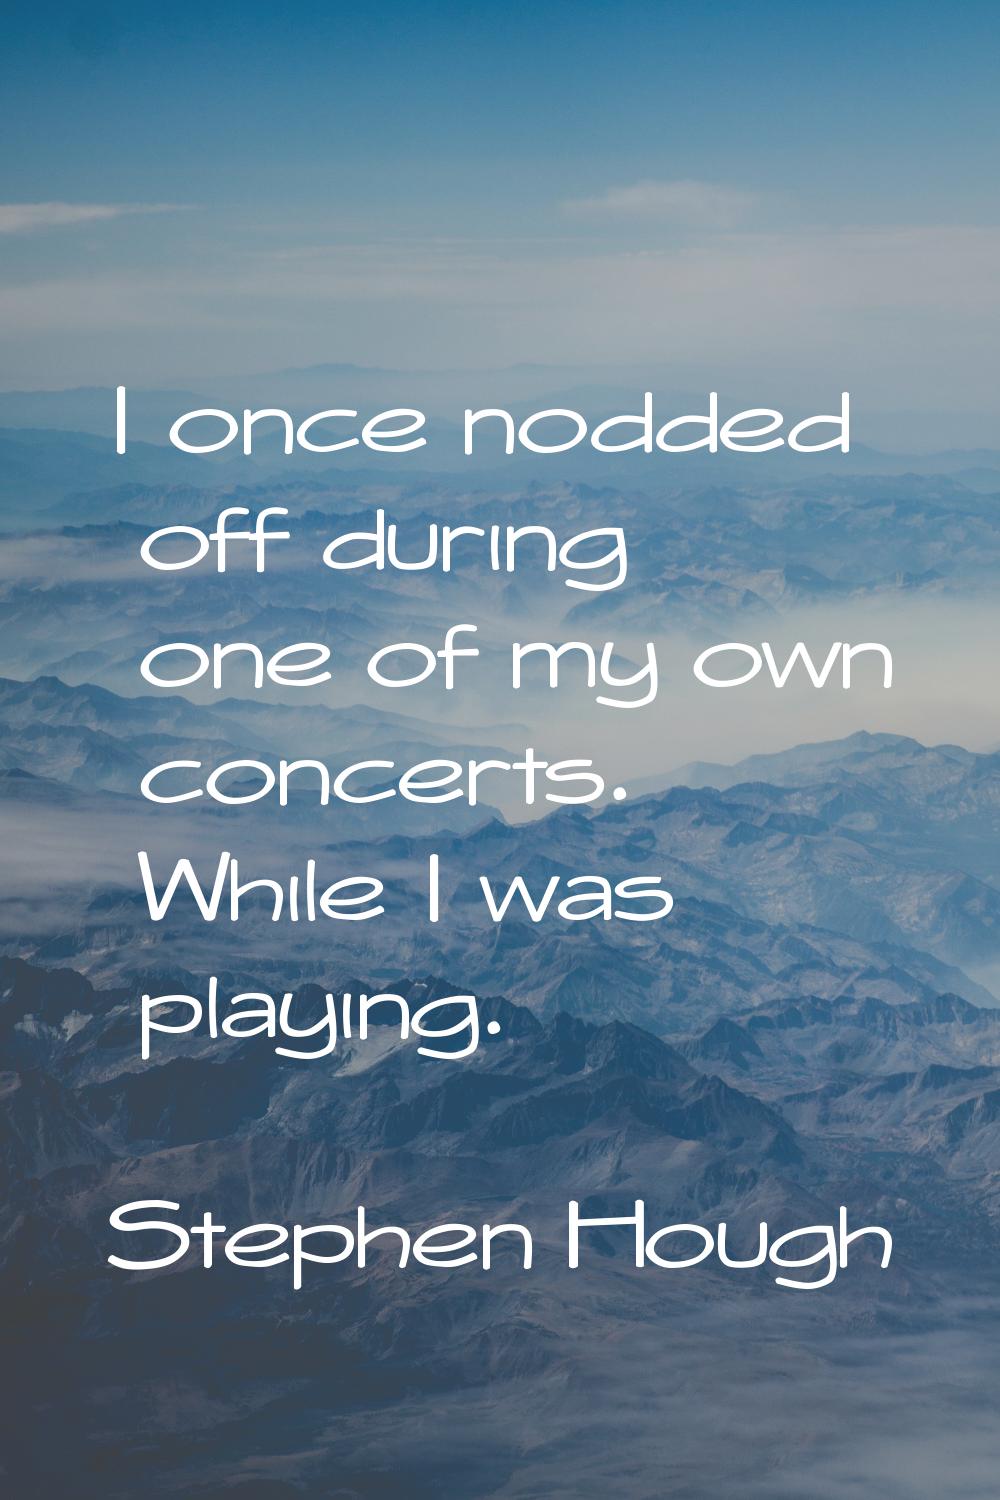 I once nodded off during one of my own concerts. While I was playing.